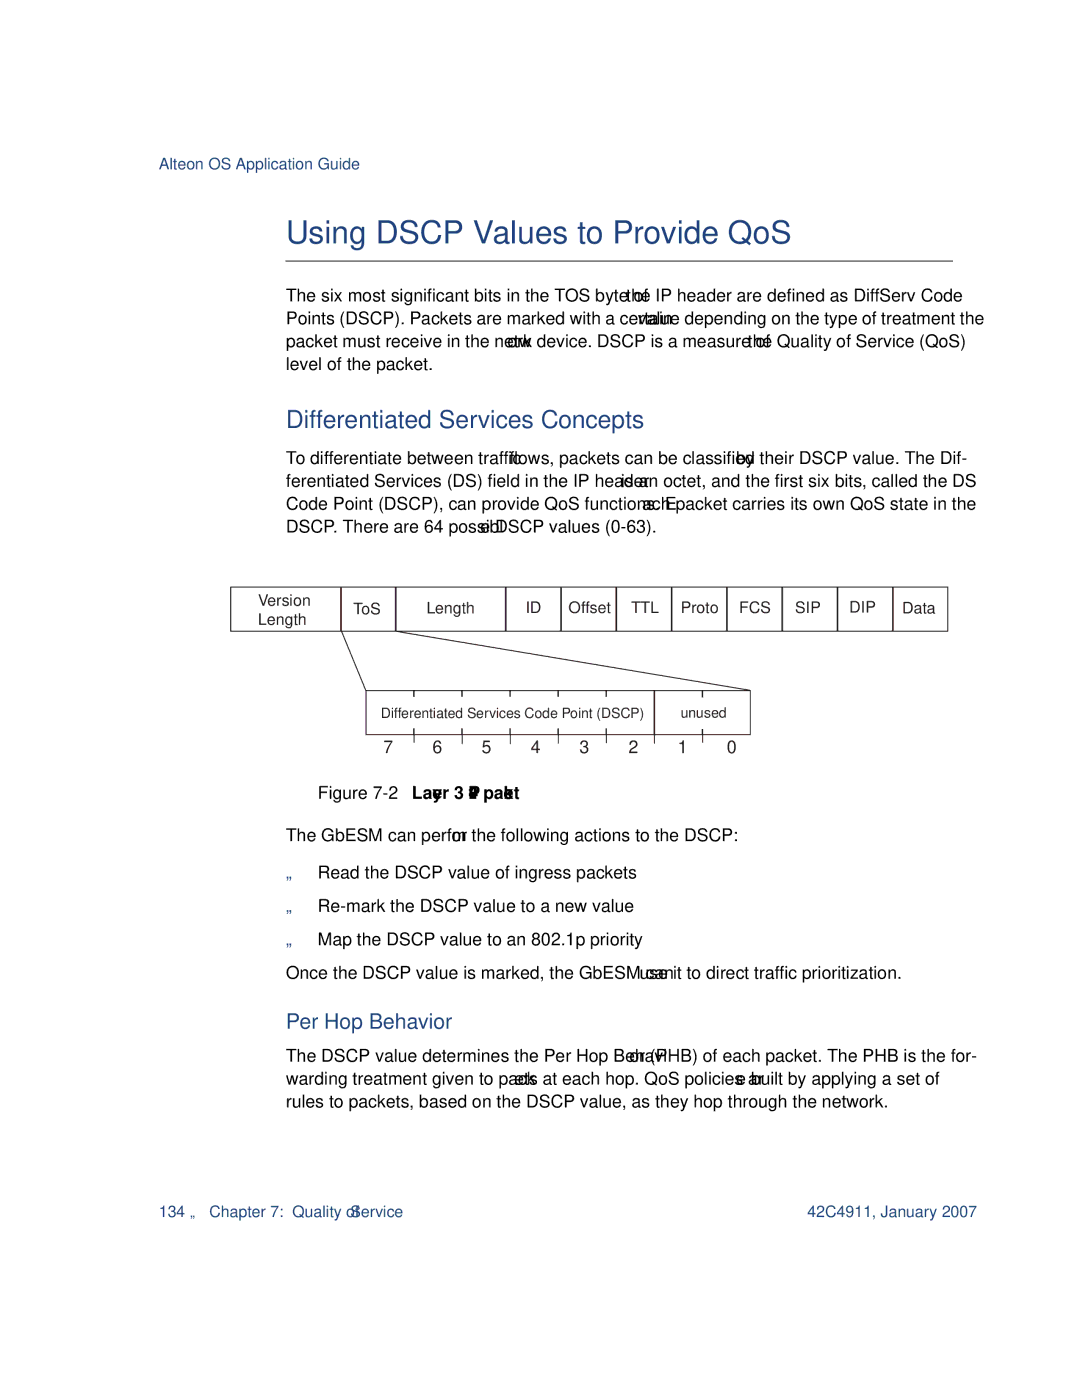 Nortel Networks 42C4911 manual Using Dscp Values to Provide QoS, Differentiated Services Concepts, Per Hop Behavior 